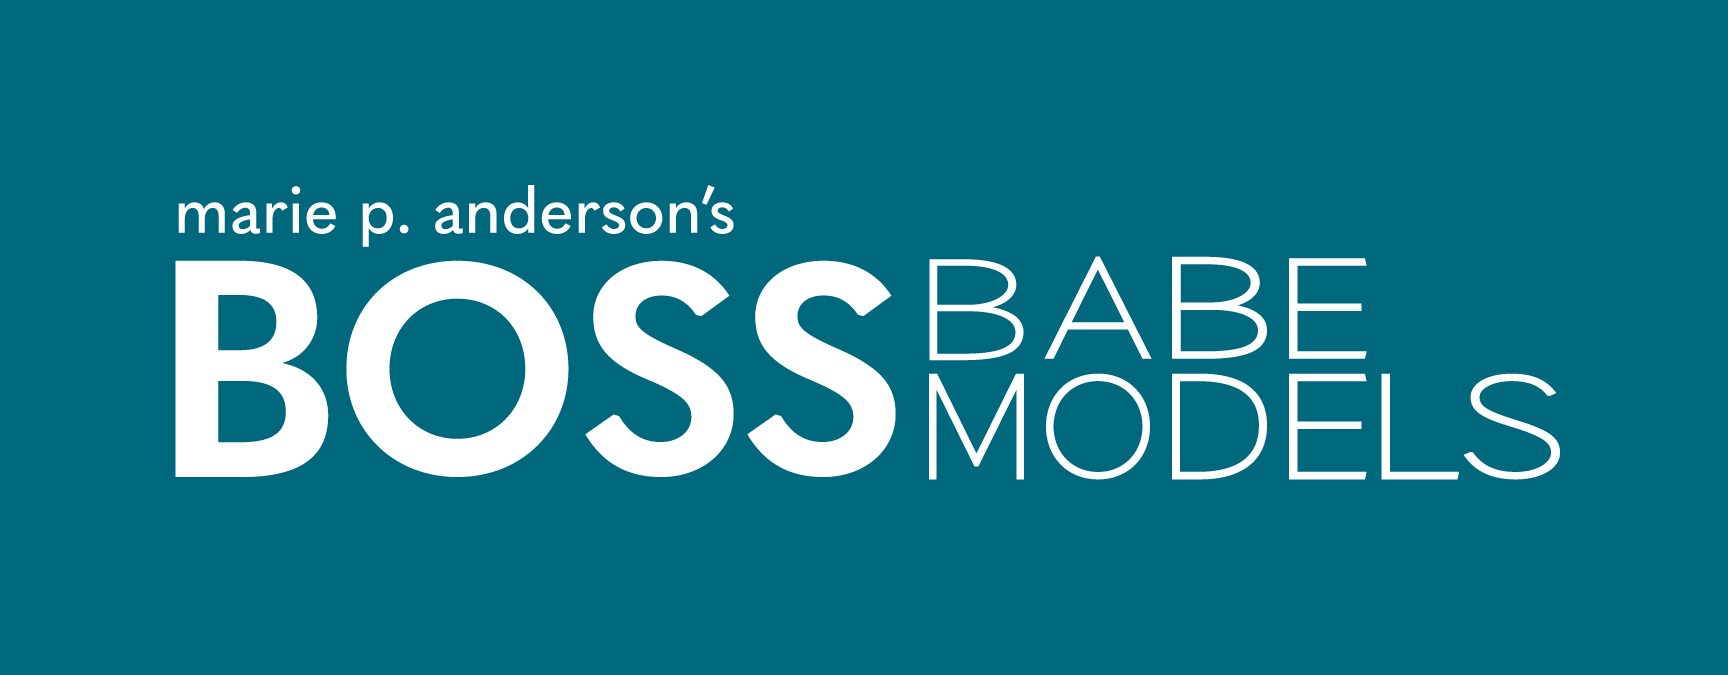 Marie P. Anderson - Founder - Boss Babe Models